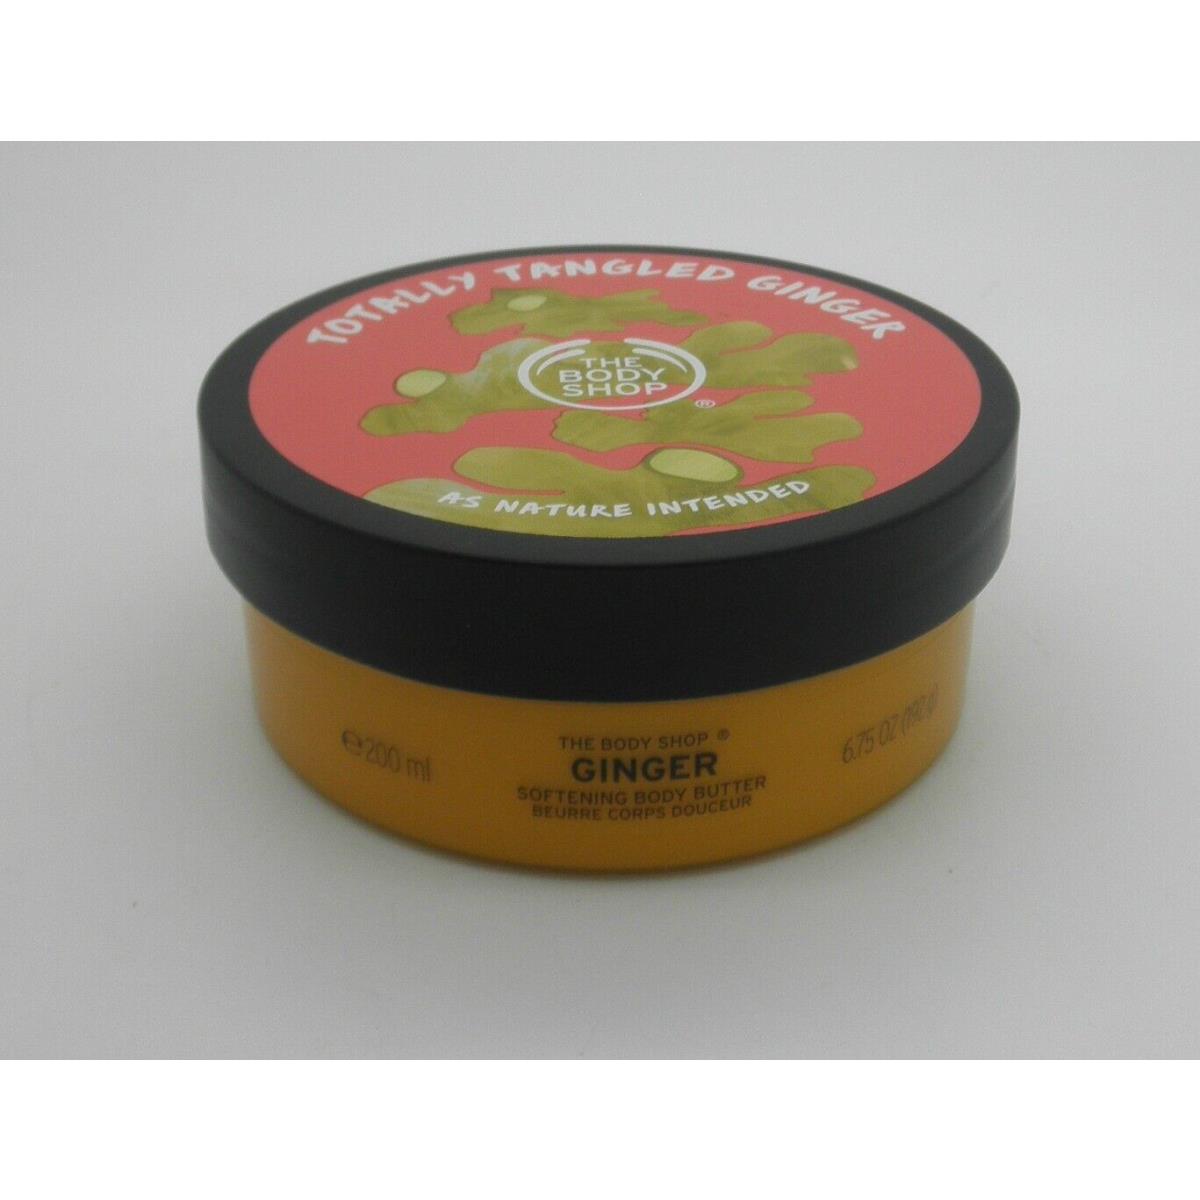 The Body Shop Totally Tangled Ginger Body Butter 6.75 oz